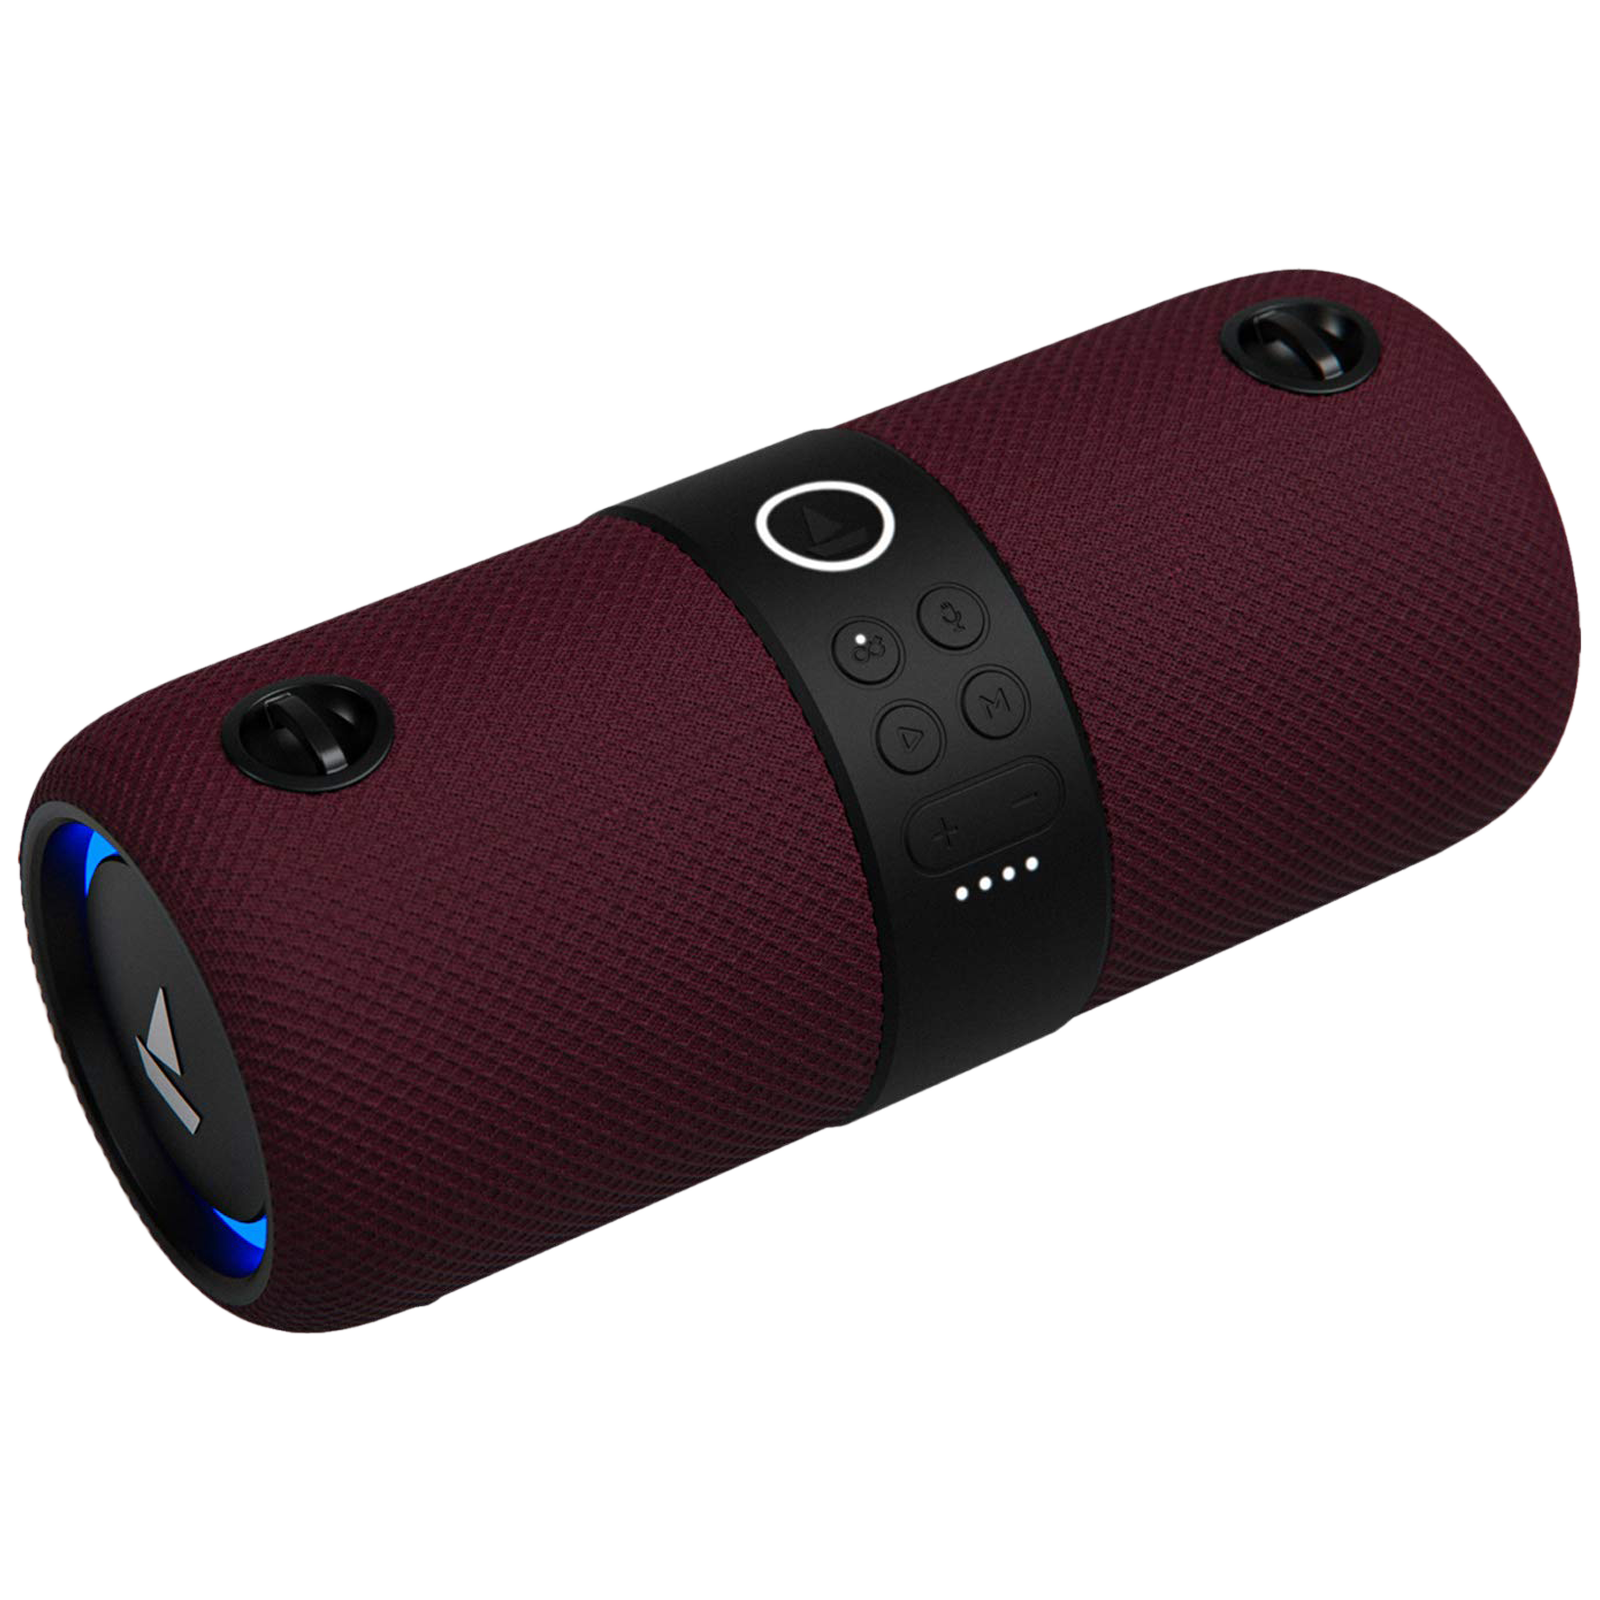 boAt Stone 1208 14W Portable Bluetooth Speaker (IPX7 Water Resistant, boAt Signature Sound, Stereo Channel, Maroon)